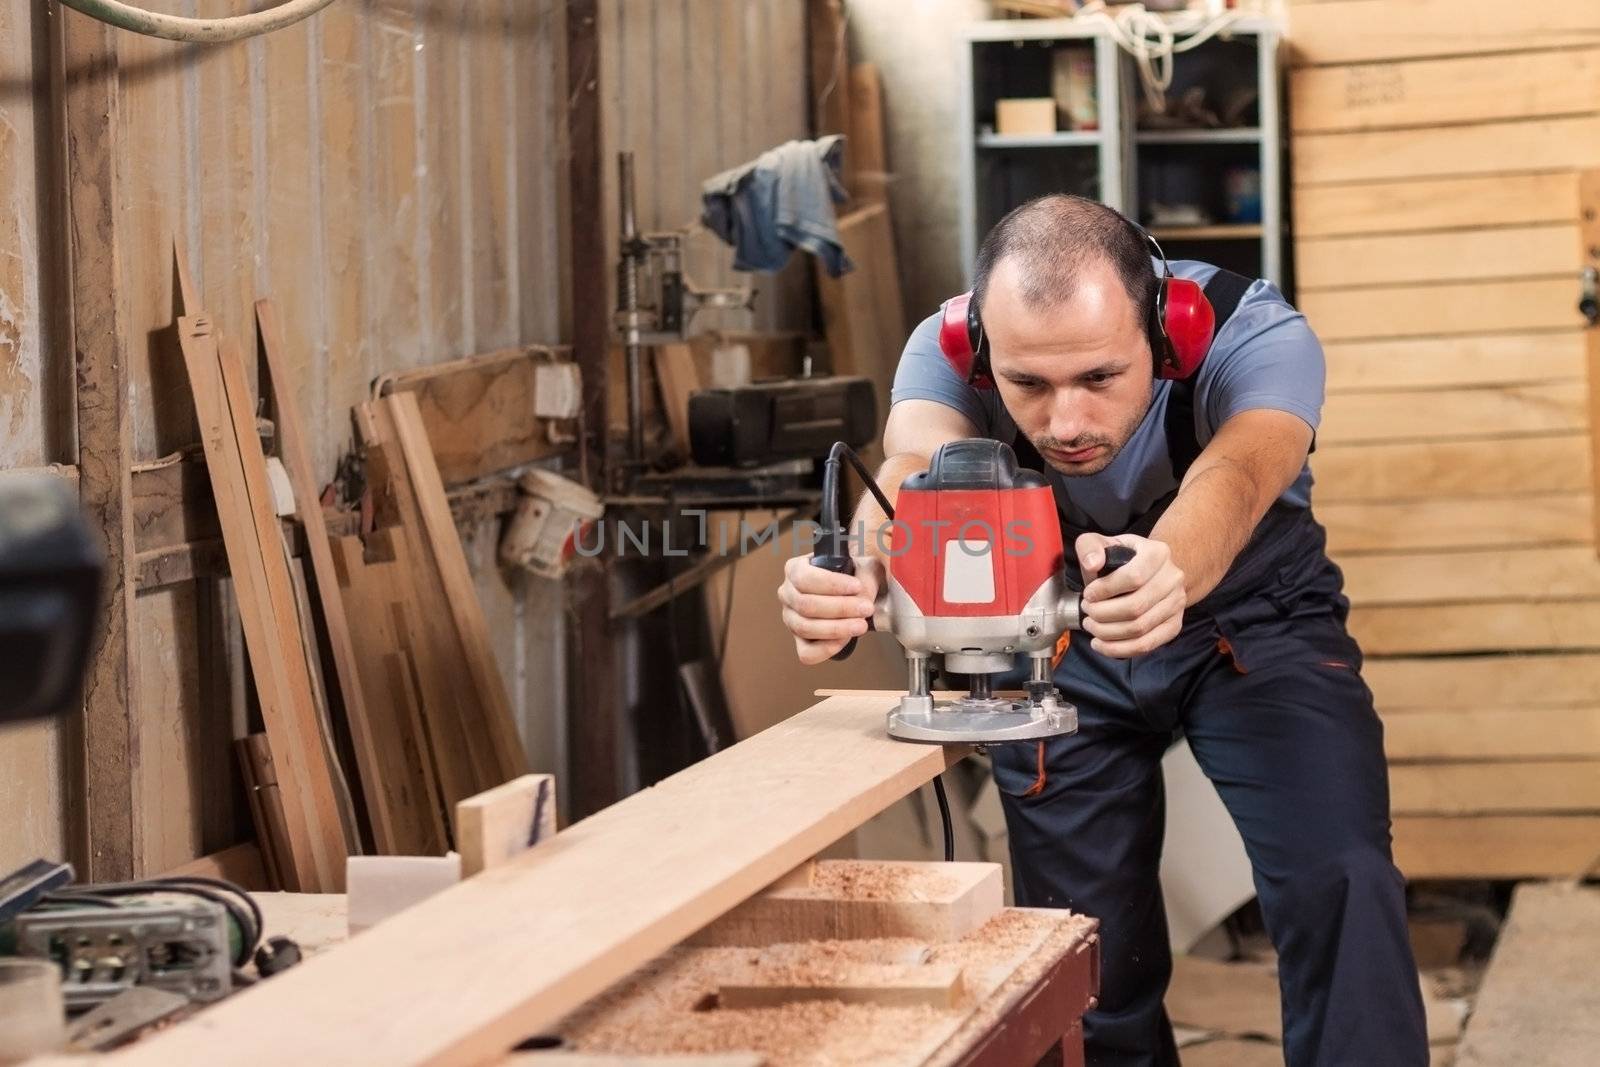 Carpenter with an electric router, horizontal shot